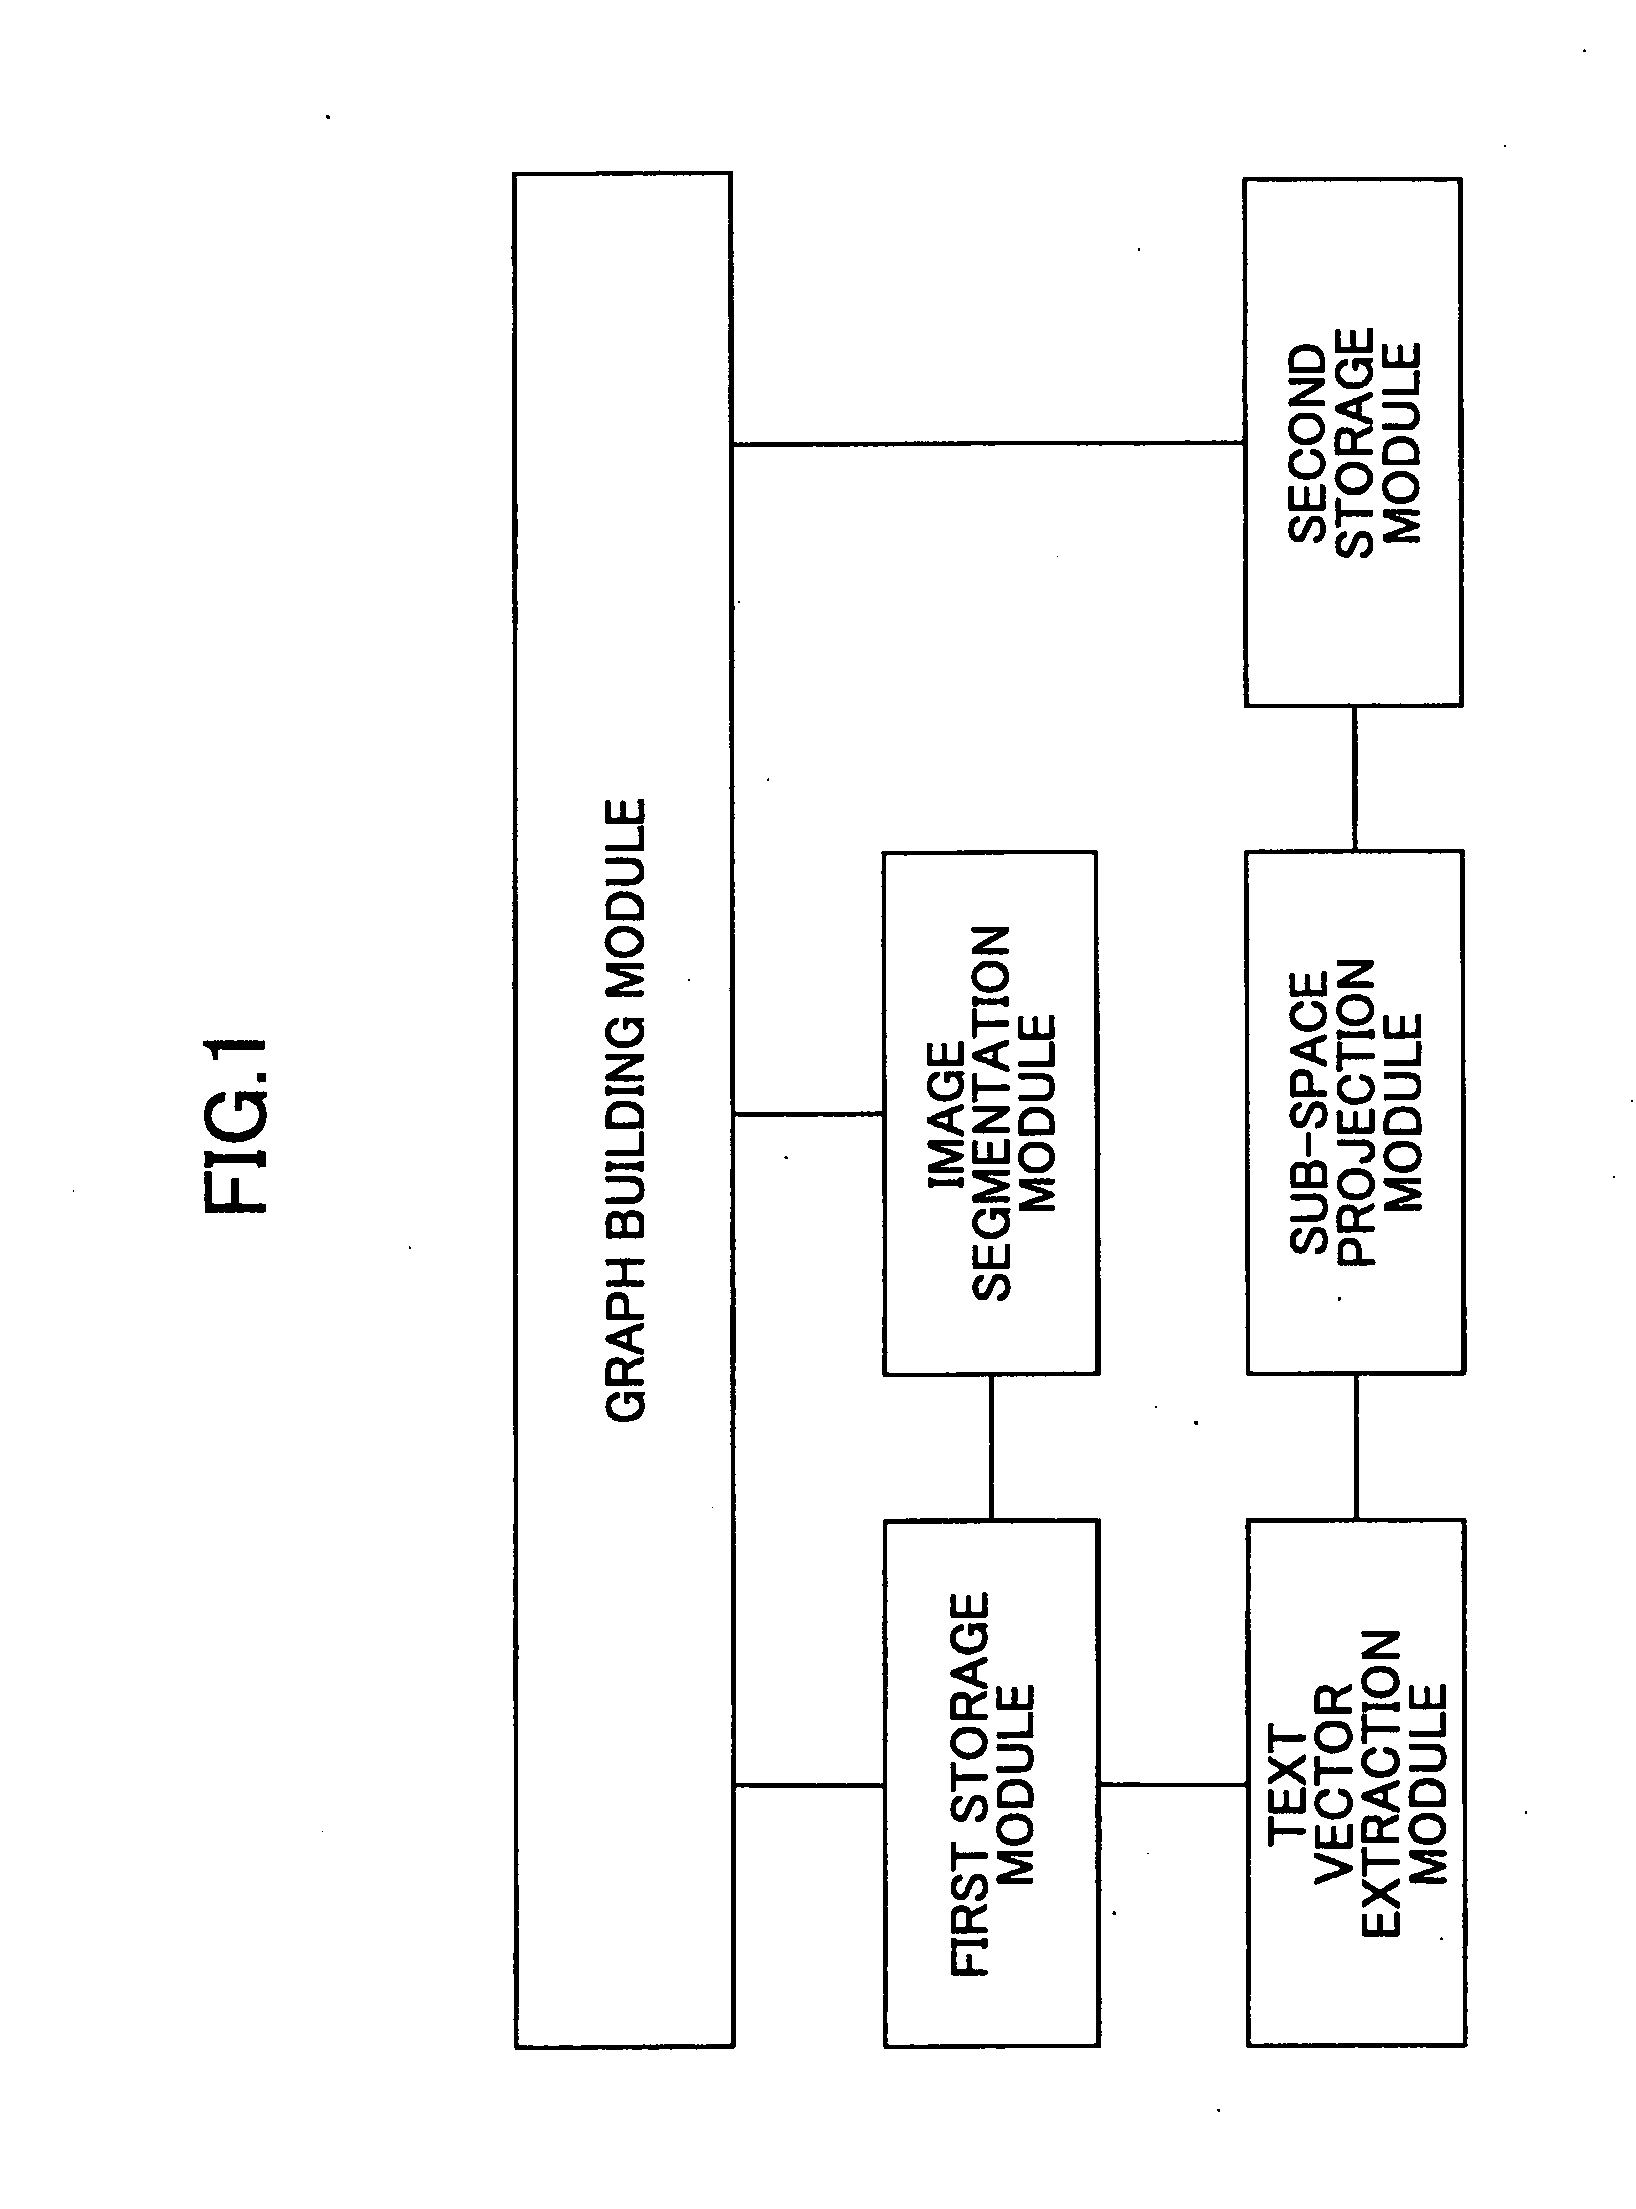 Image learning, automatic annotation, retrieval method, and device